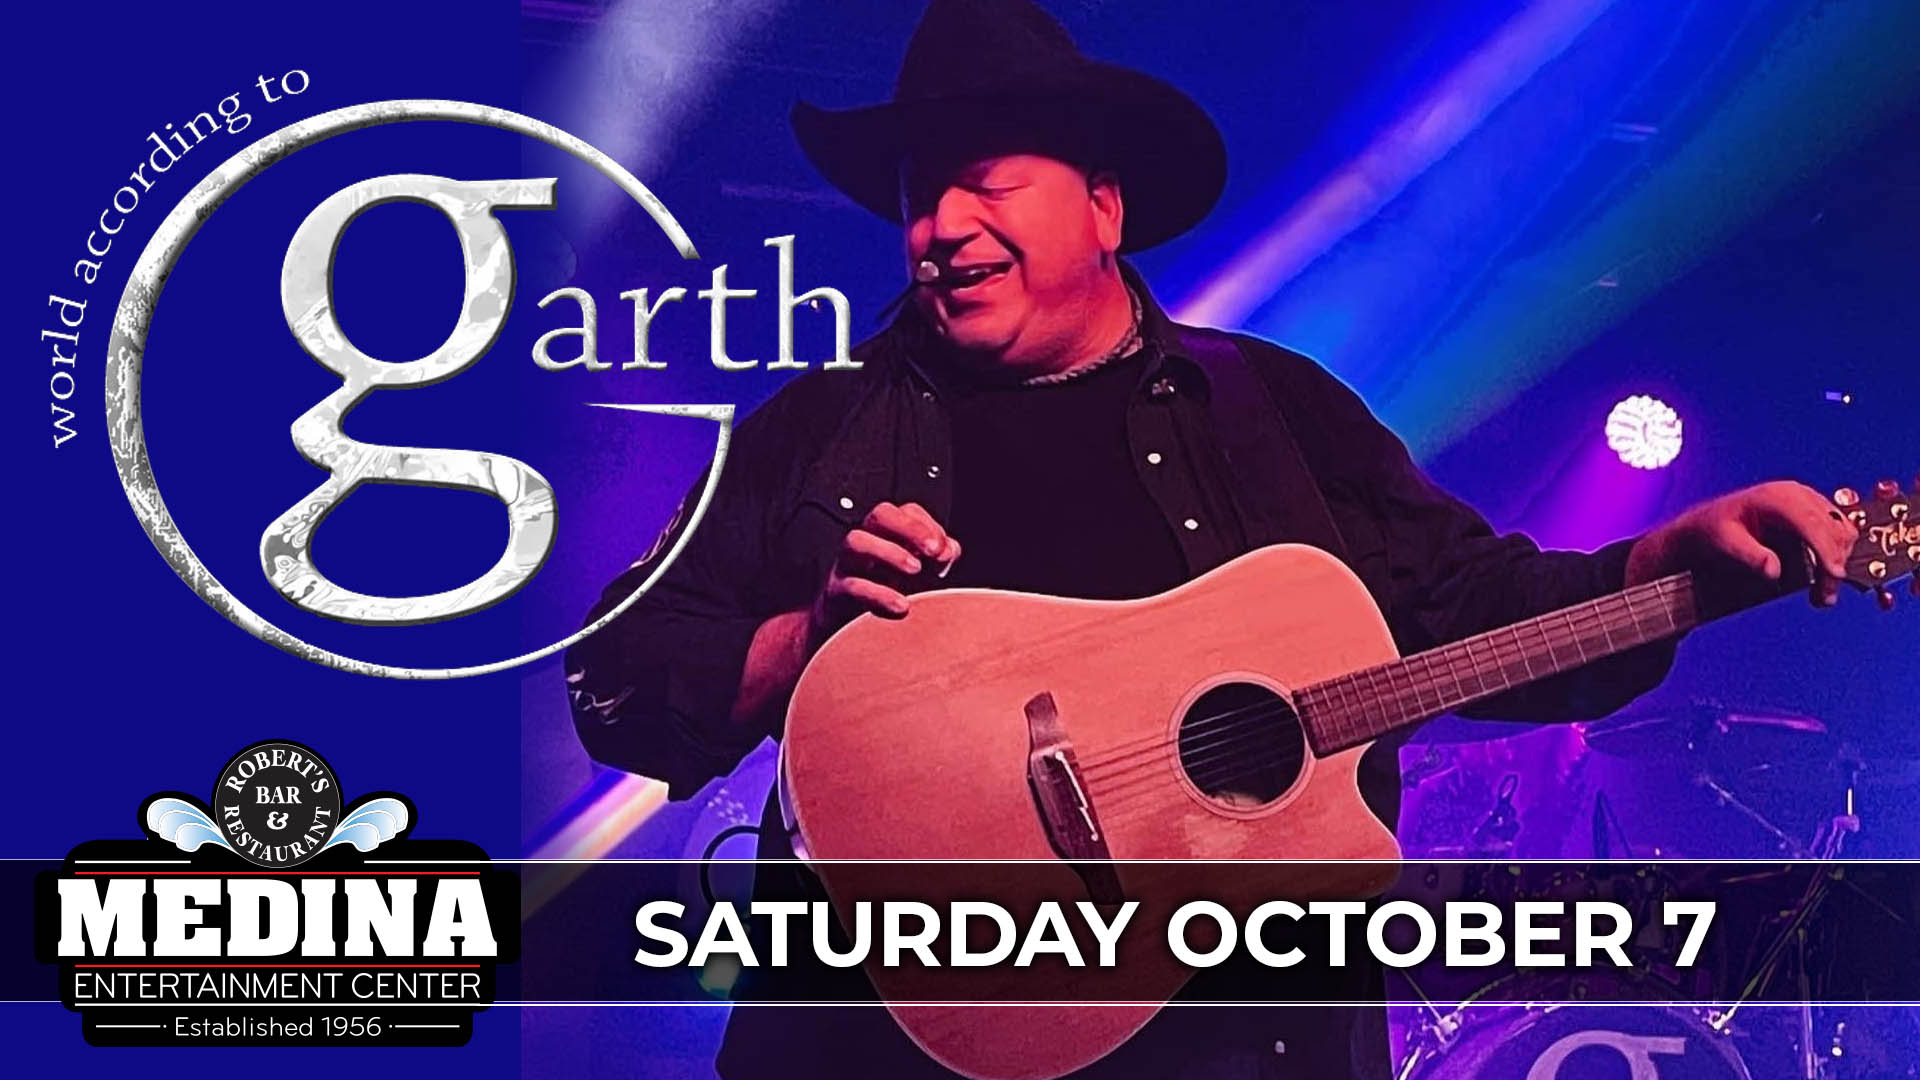 World According To Garth With Special Guest TBA Medina Entertainment Center Saturday, October 7TH, 2023 Doors: 7:00PM | Music: 8:00PM | 21+ Tickets on-sale Friday May 12 at 11am General Seating $22 / Silver Reserved $27 / Gold Reserved $32 plus applicable fees